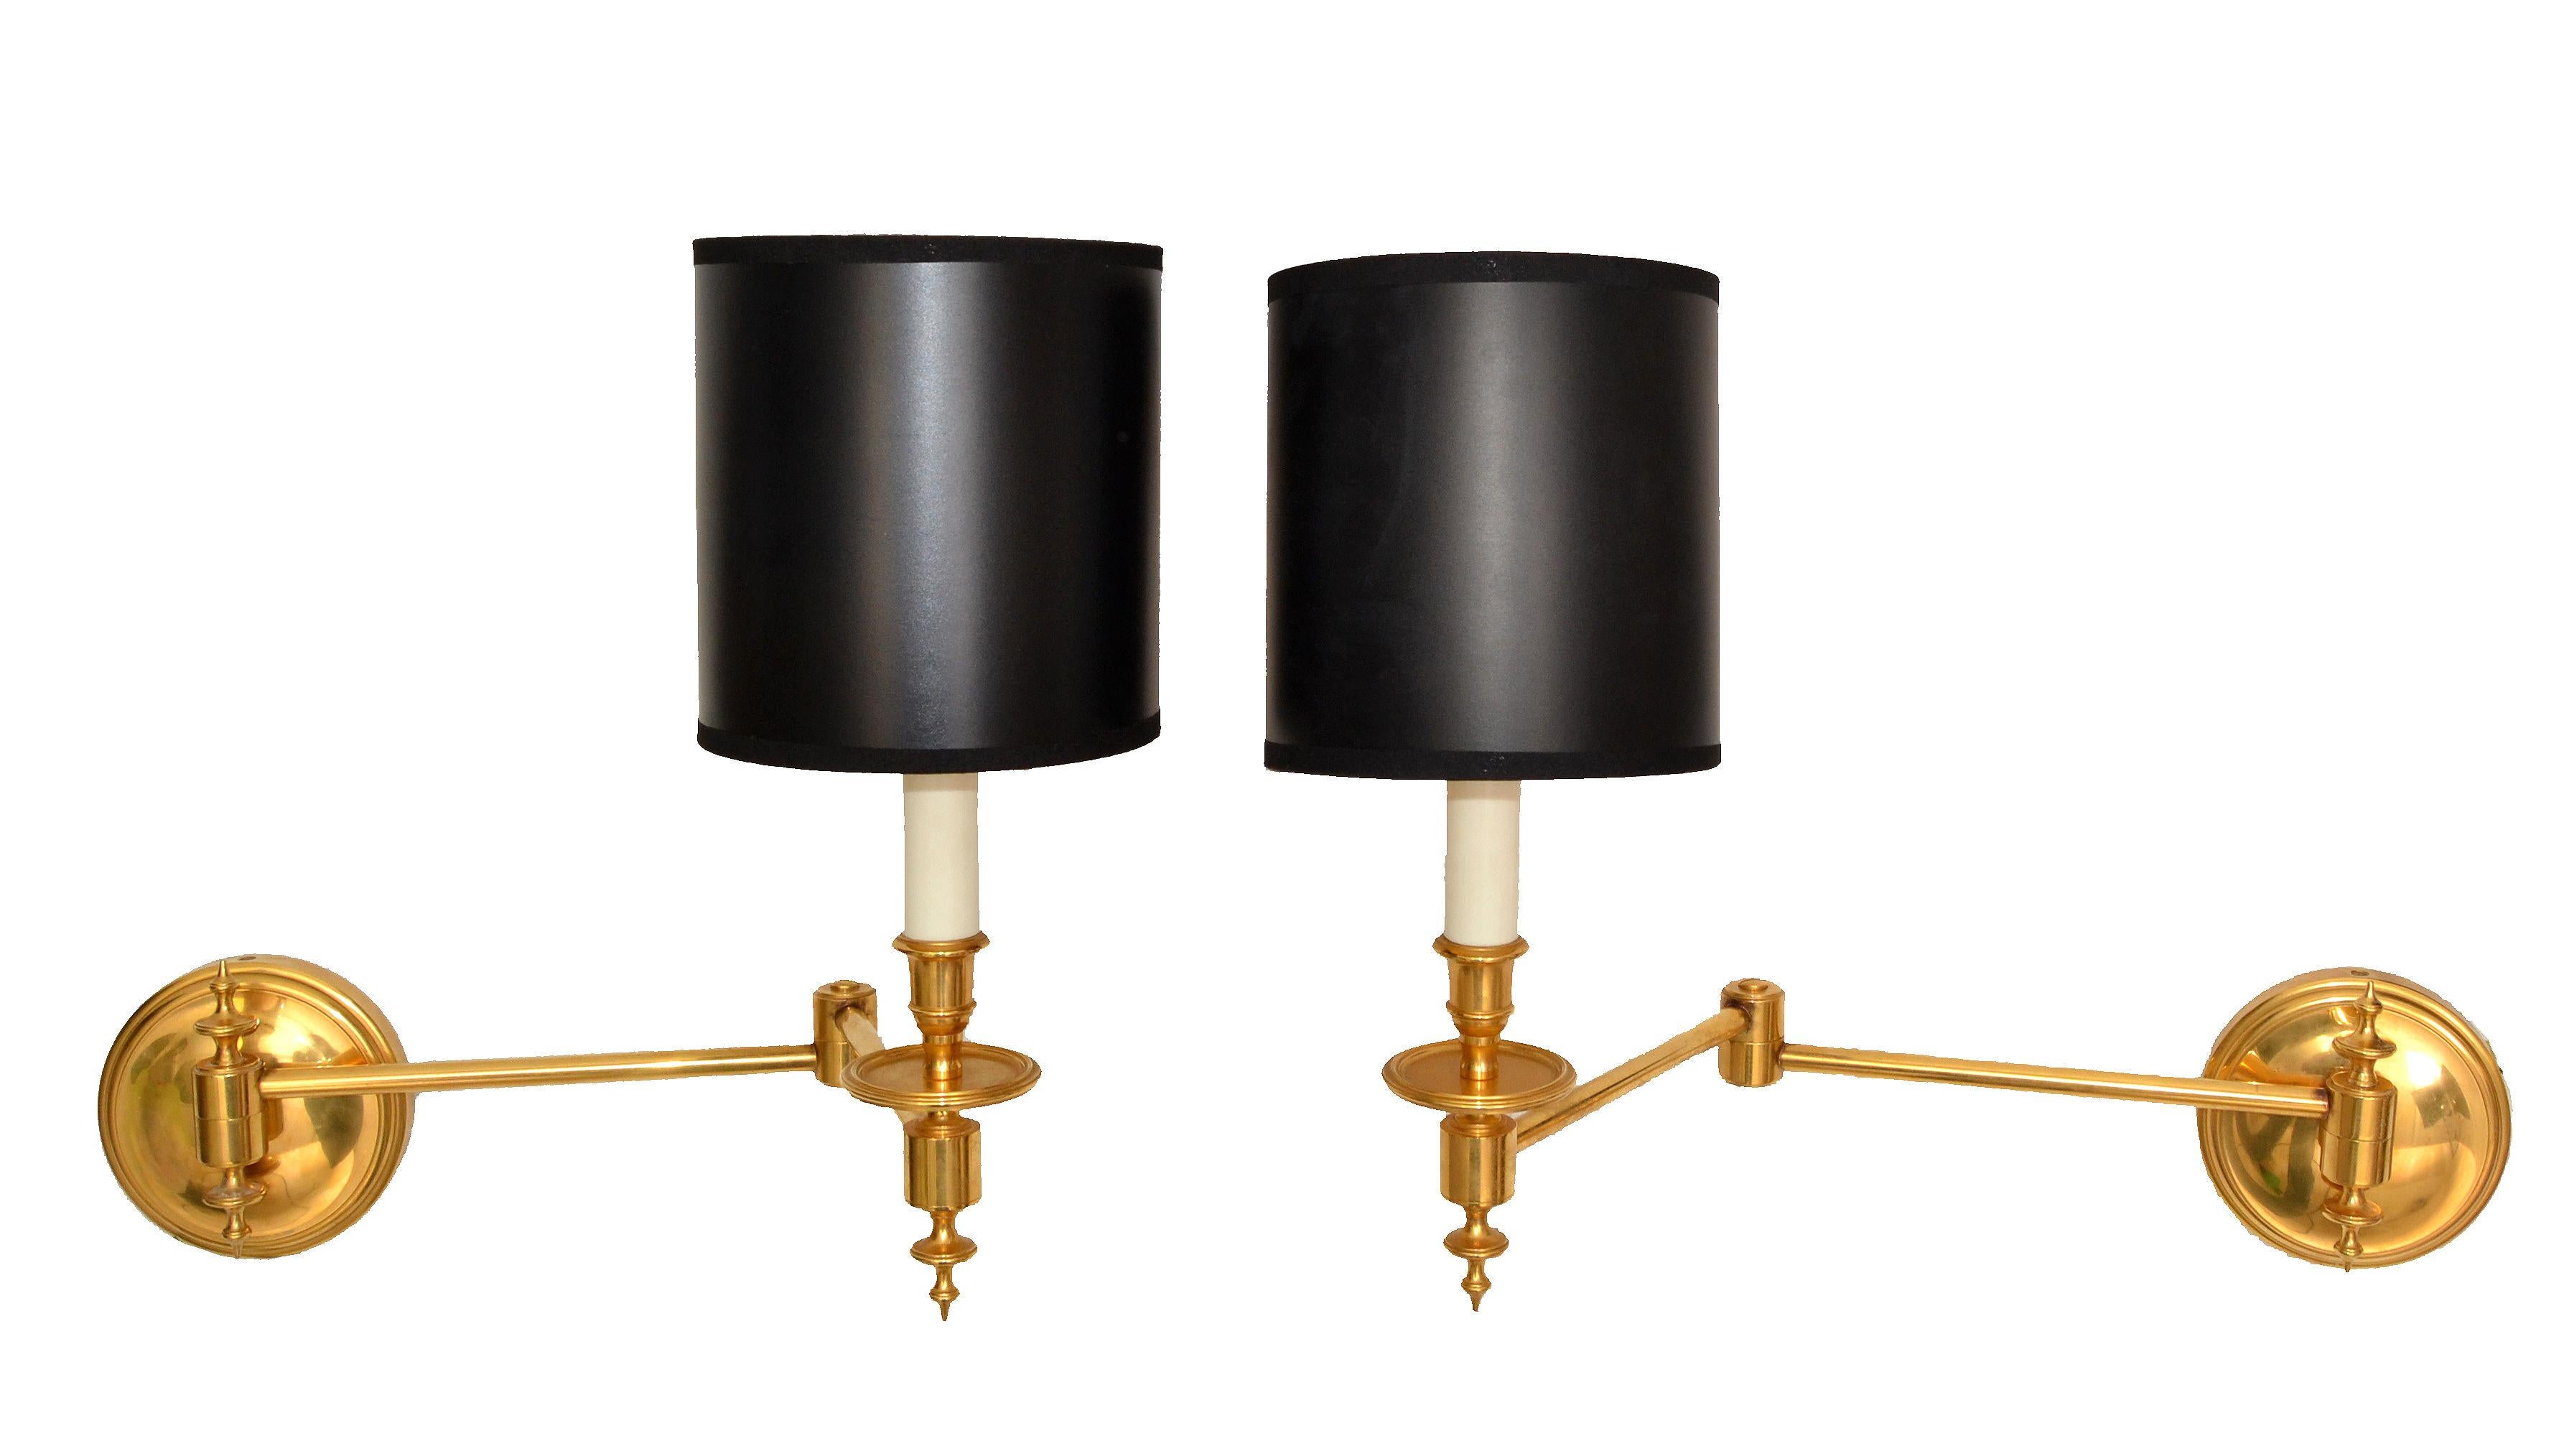 Pair of Mid-Century Modern retractable sconces, wall lamps, wall lights by Maison Tisserand, Art & Style made in France. One of the last Parisian Bronzier.
Exceptional doré bronze quality.
Dimmer function
Back plate measures: 5 inches.
Come with